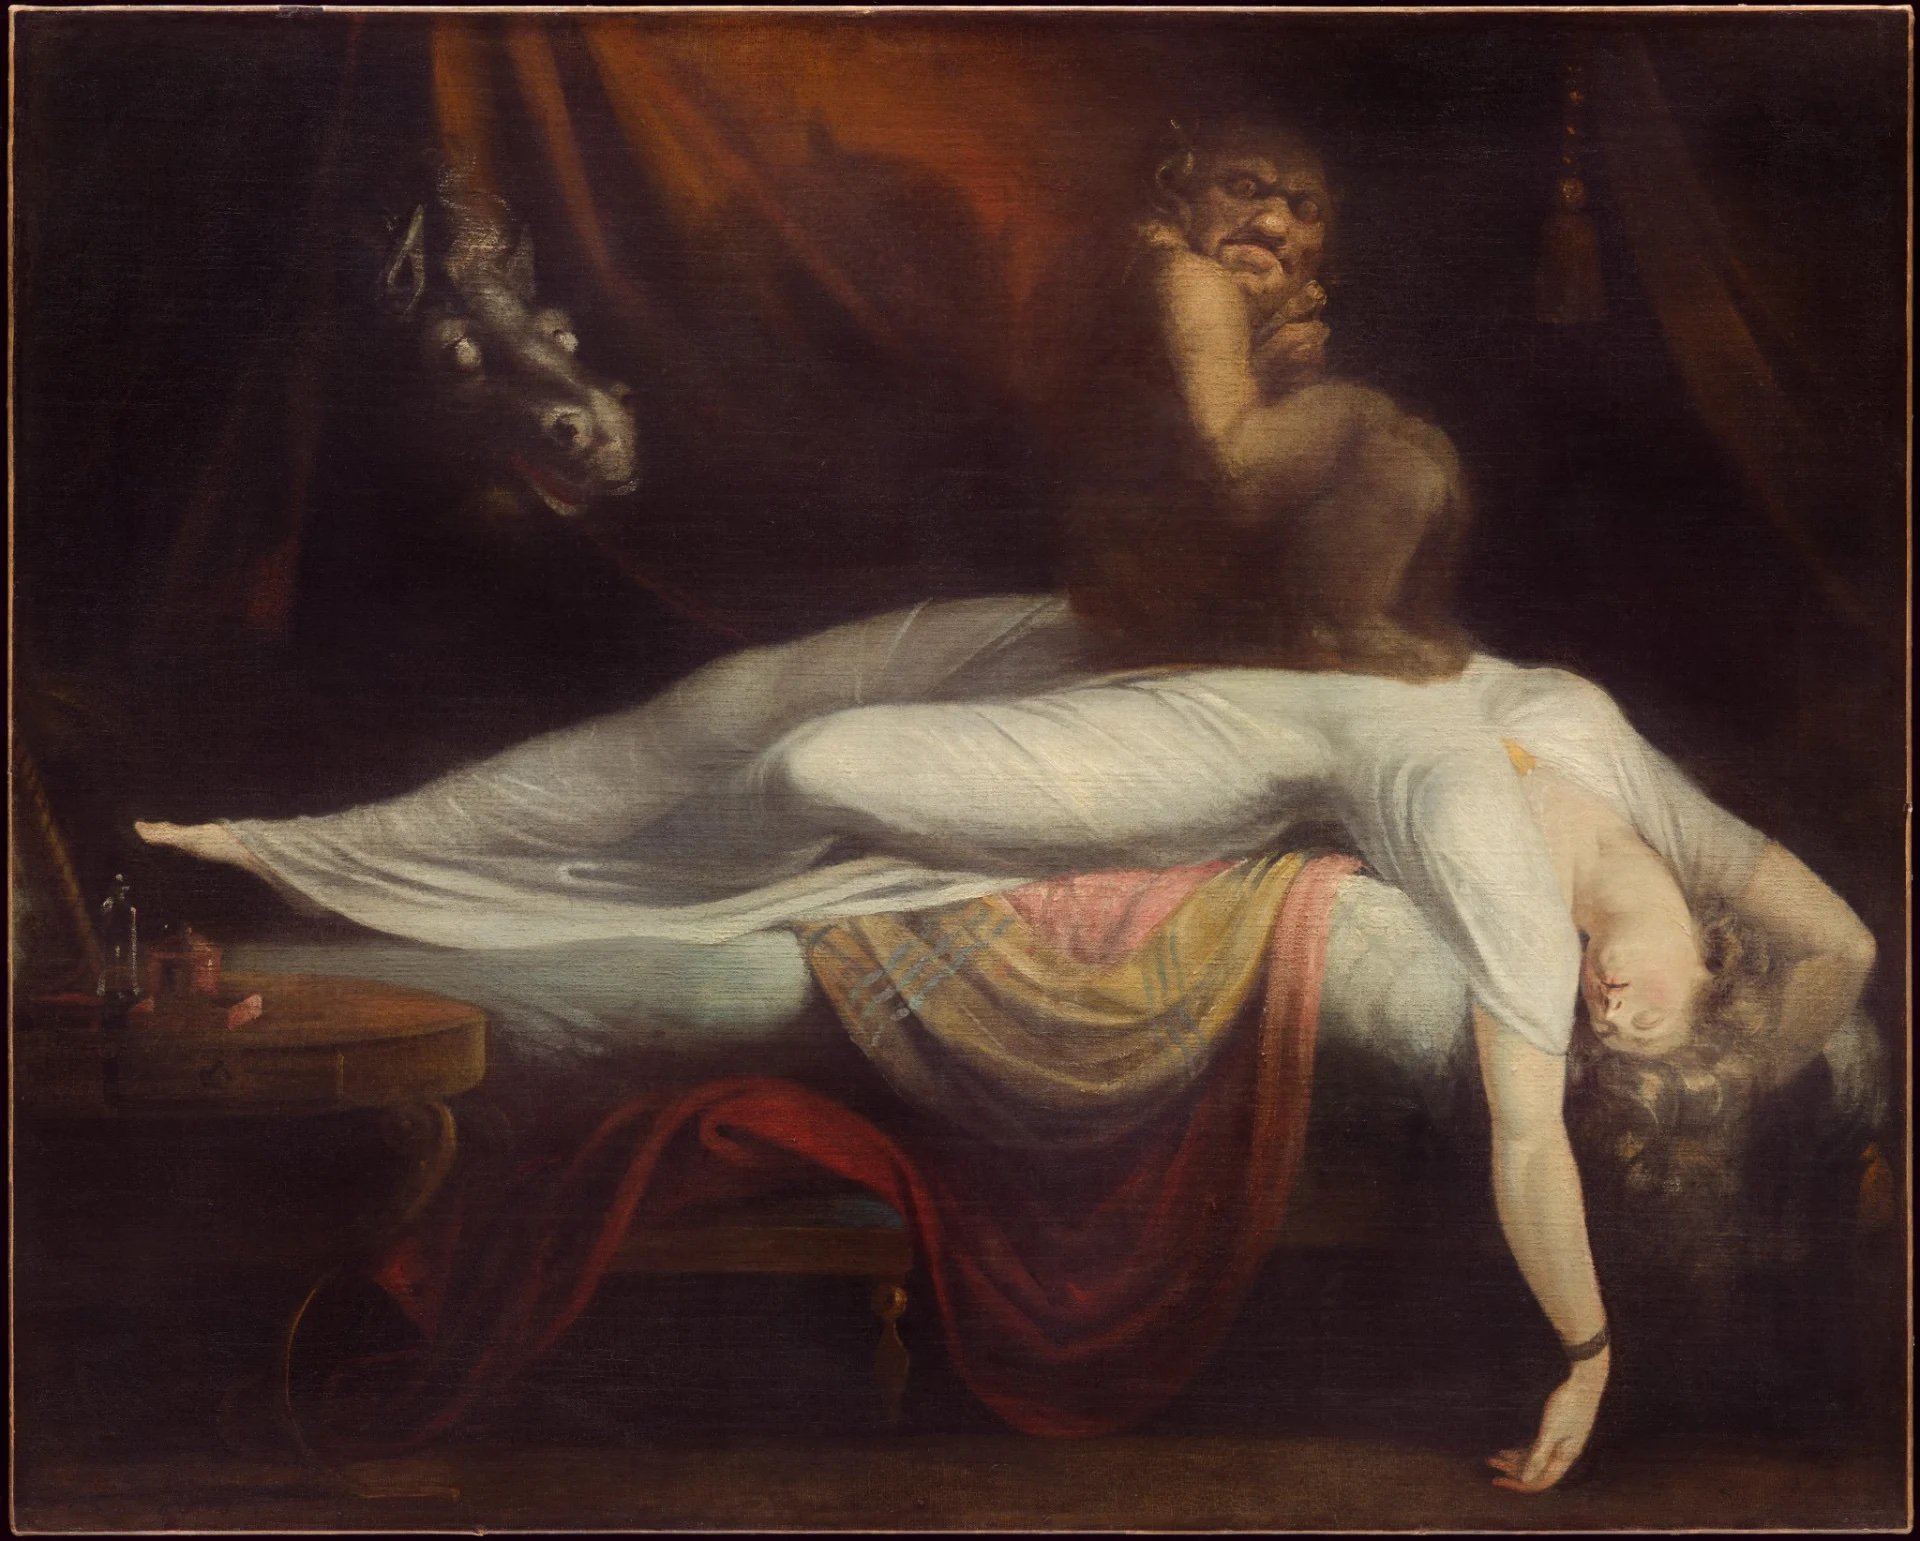 A painting of a sleeping woman with a gnome-like creature on top of her and horse lurking in the shadows.